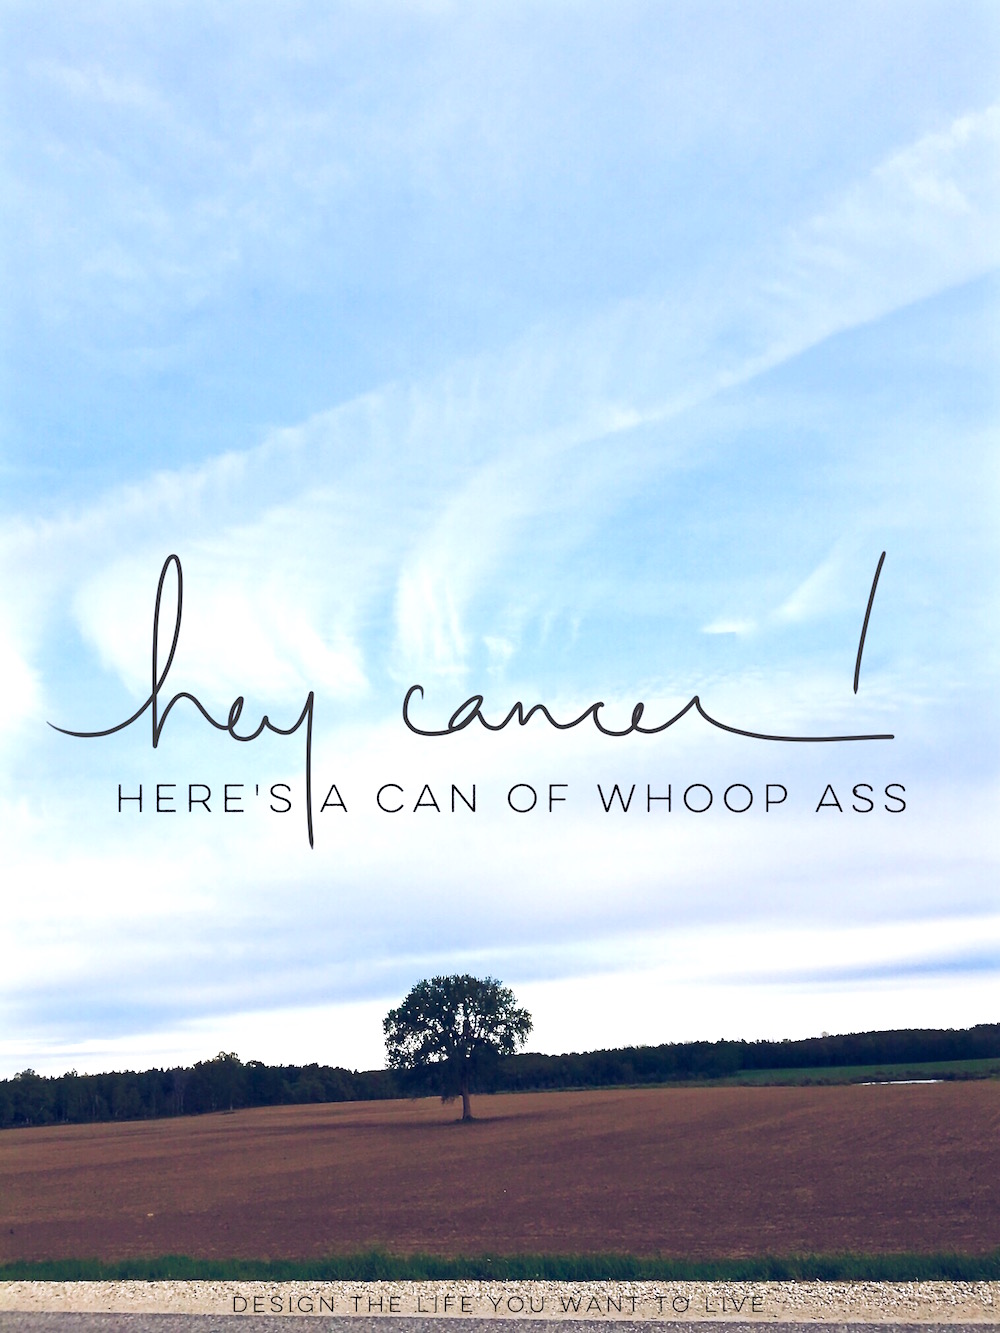 Attacking cancer | Dear cancer, here's a can of whoop ass. Open it. | DESIGN THE LIFE YOU WANT TO LIVE | Lynne Knowlton